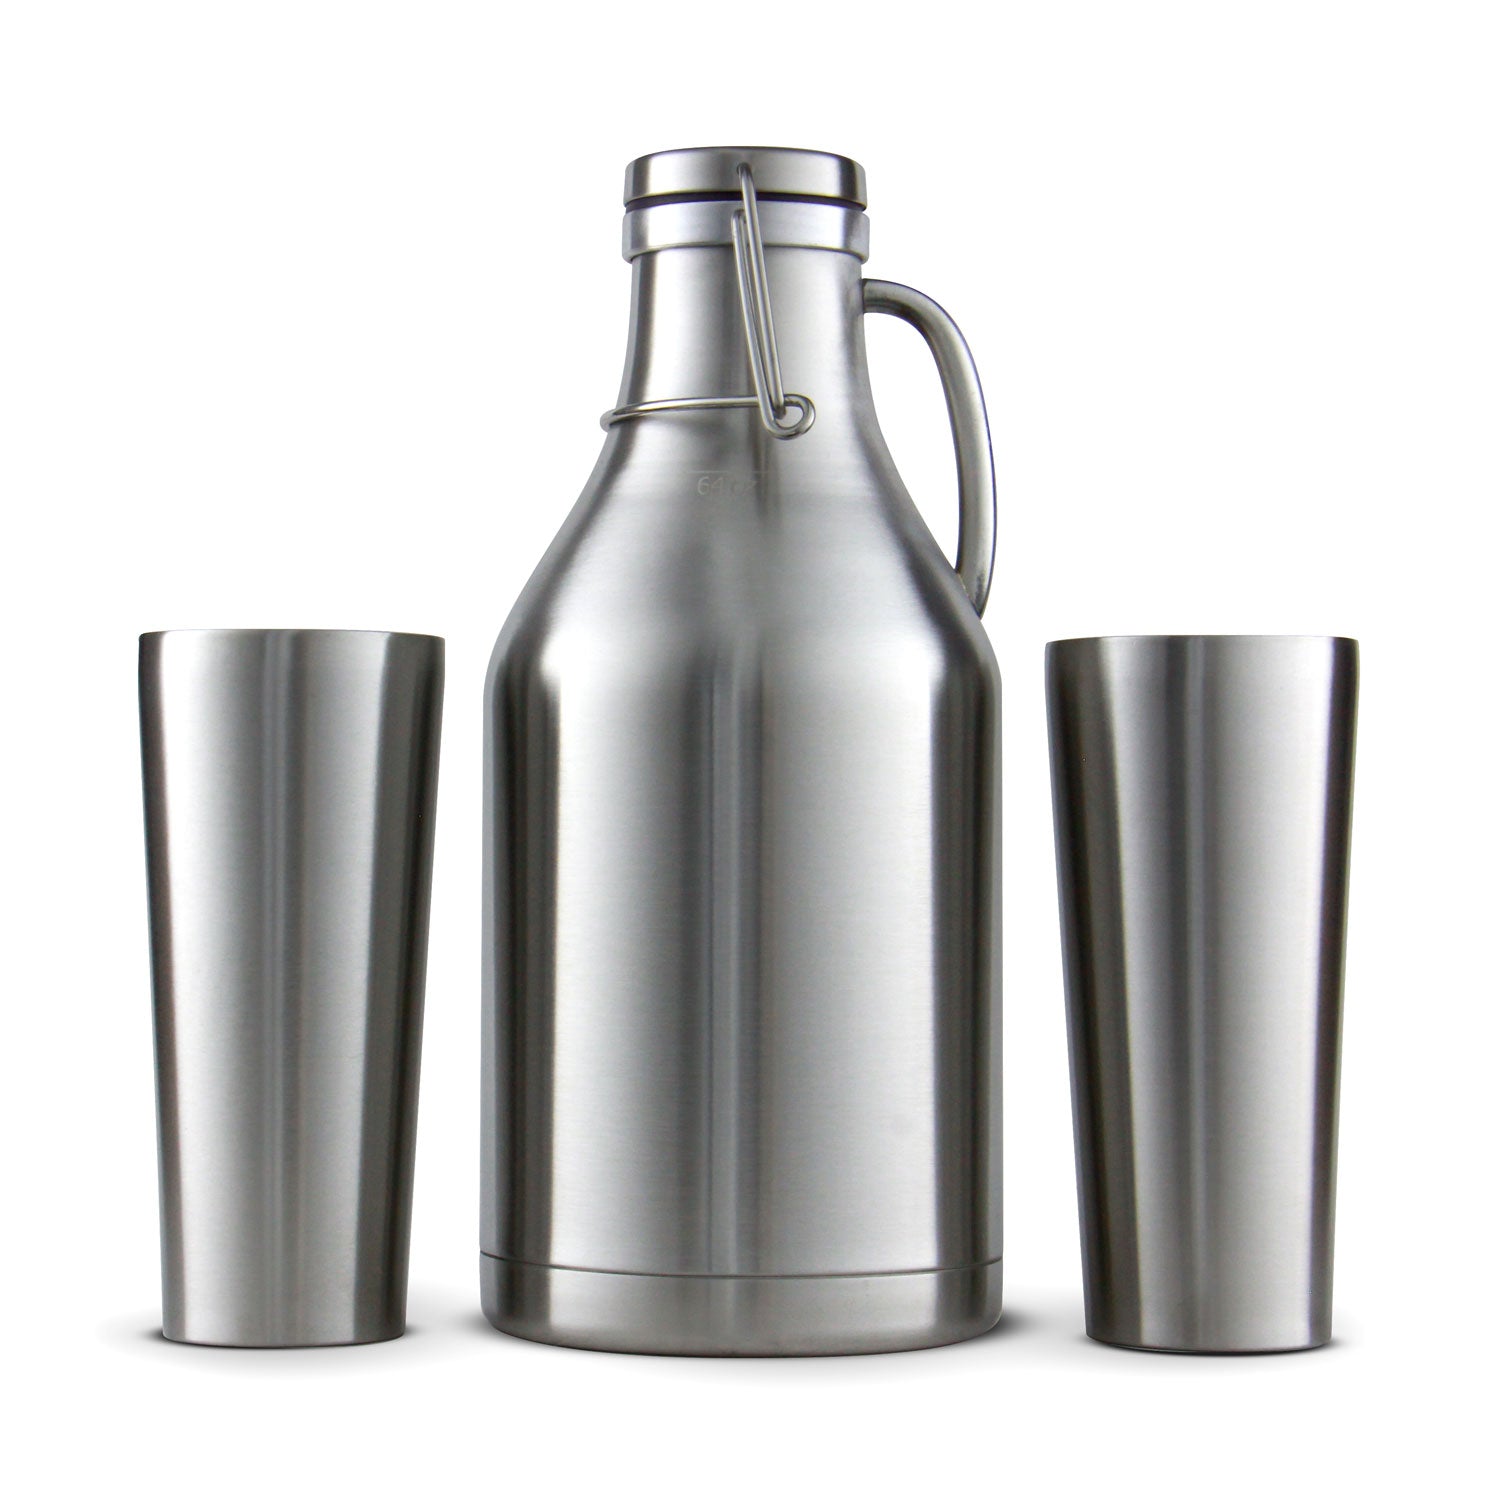 64-oz. Stainless Steel Beer Growler with 2 16-oz. Stainless Steel Pint Glasses